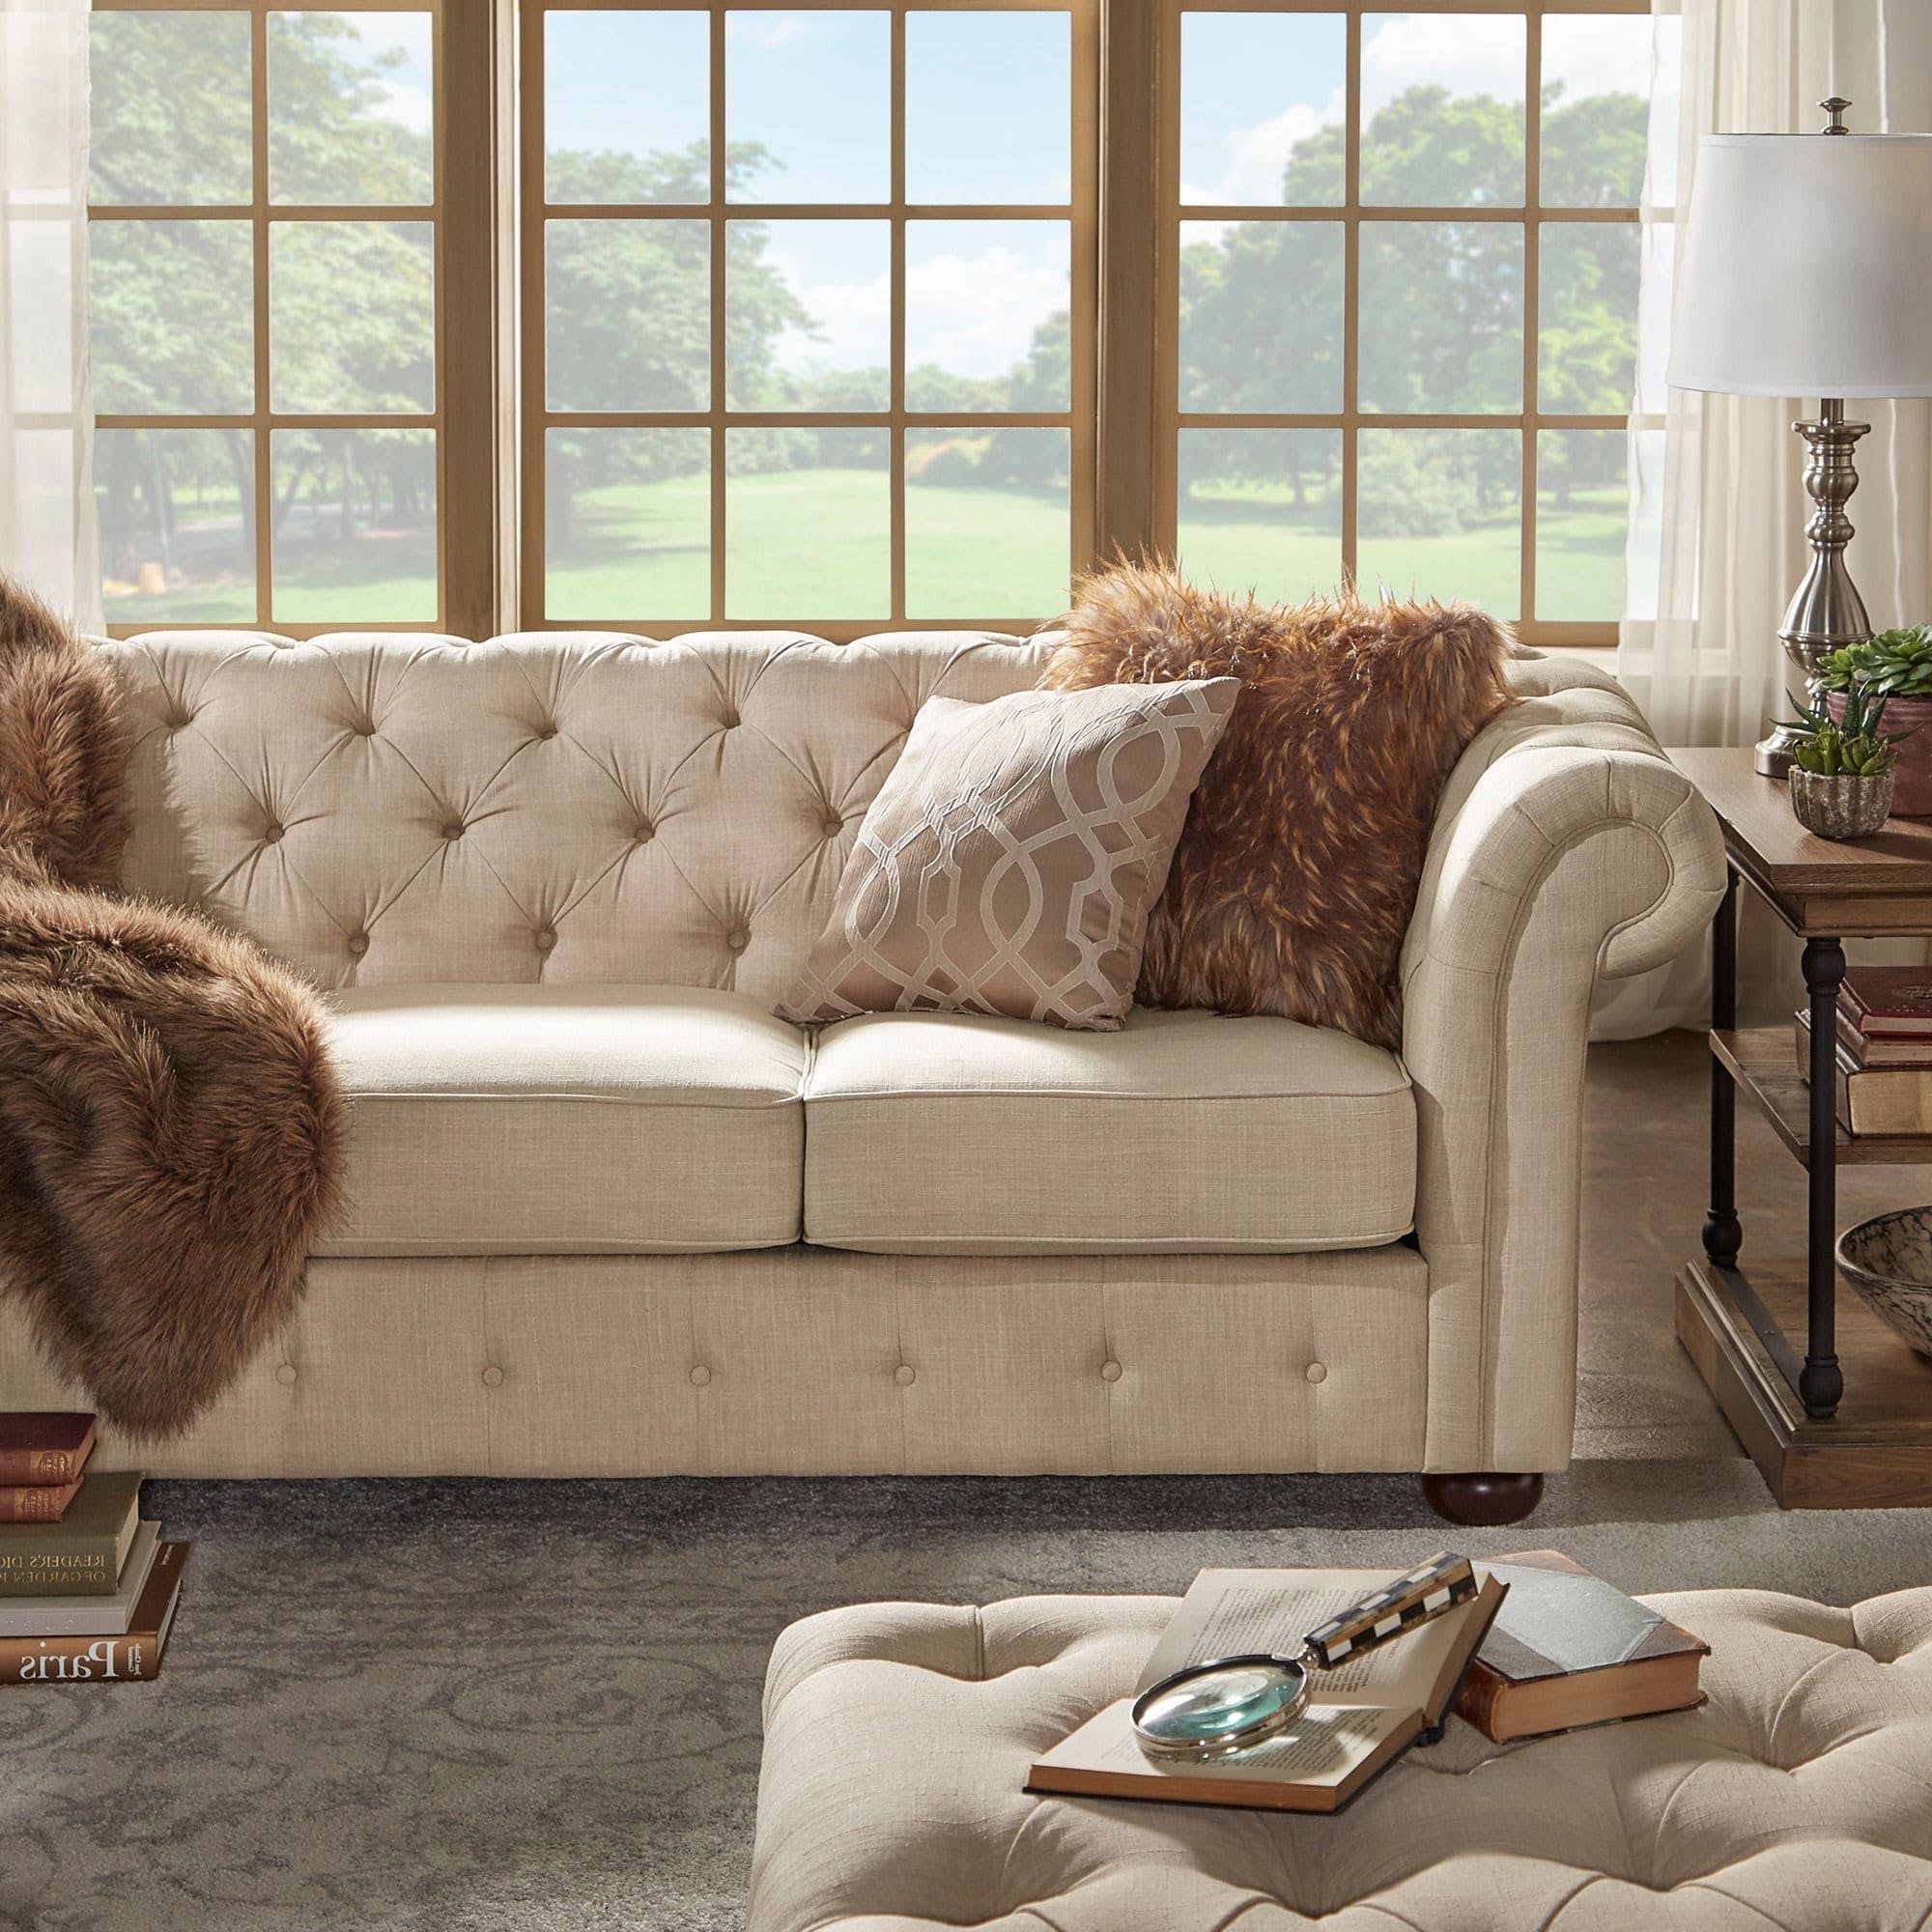 Favorite Beige Tufted Sofa Set / Looking For A Comfortable New Sofa? – Art Floppy Inside Sofas In Beige (View 2 of 15)